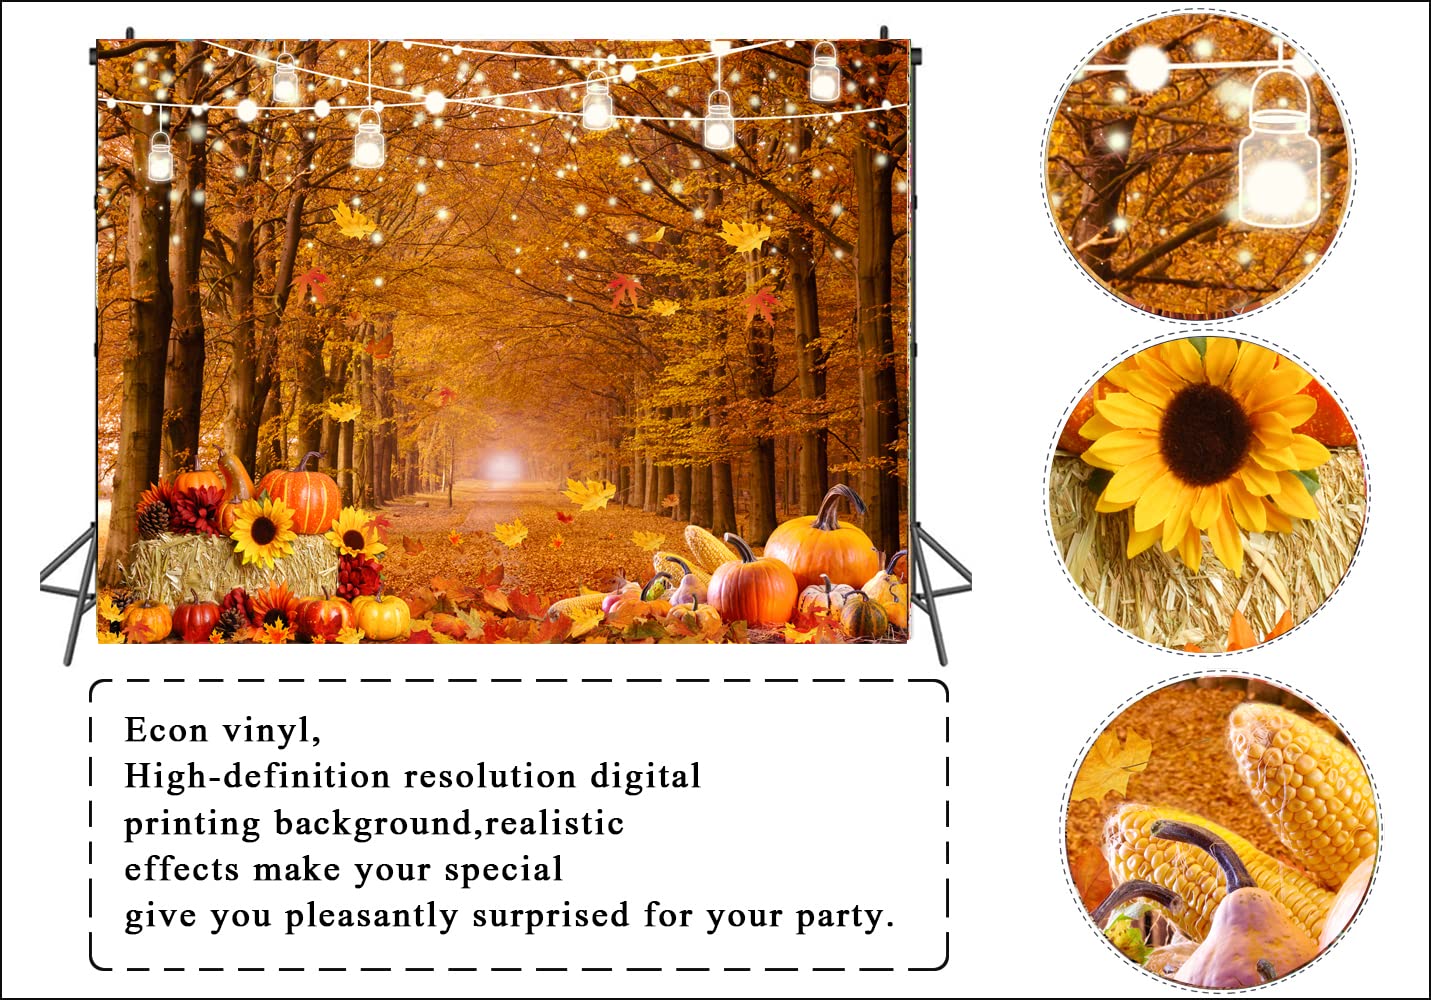 LTLYH 7x5ft Fall Forest Backdrop Autumn Thanksgiving Backdrop Maple Forest Leaves Friendsgiving Party Banner Backdrop Supplies Farm Harvest Event Photo Backdrop 185